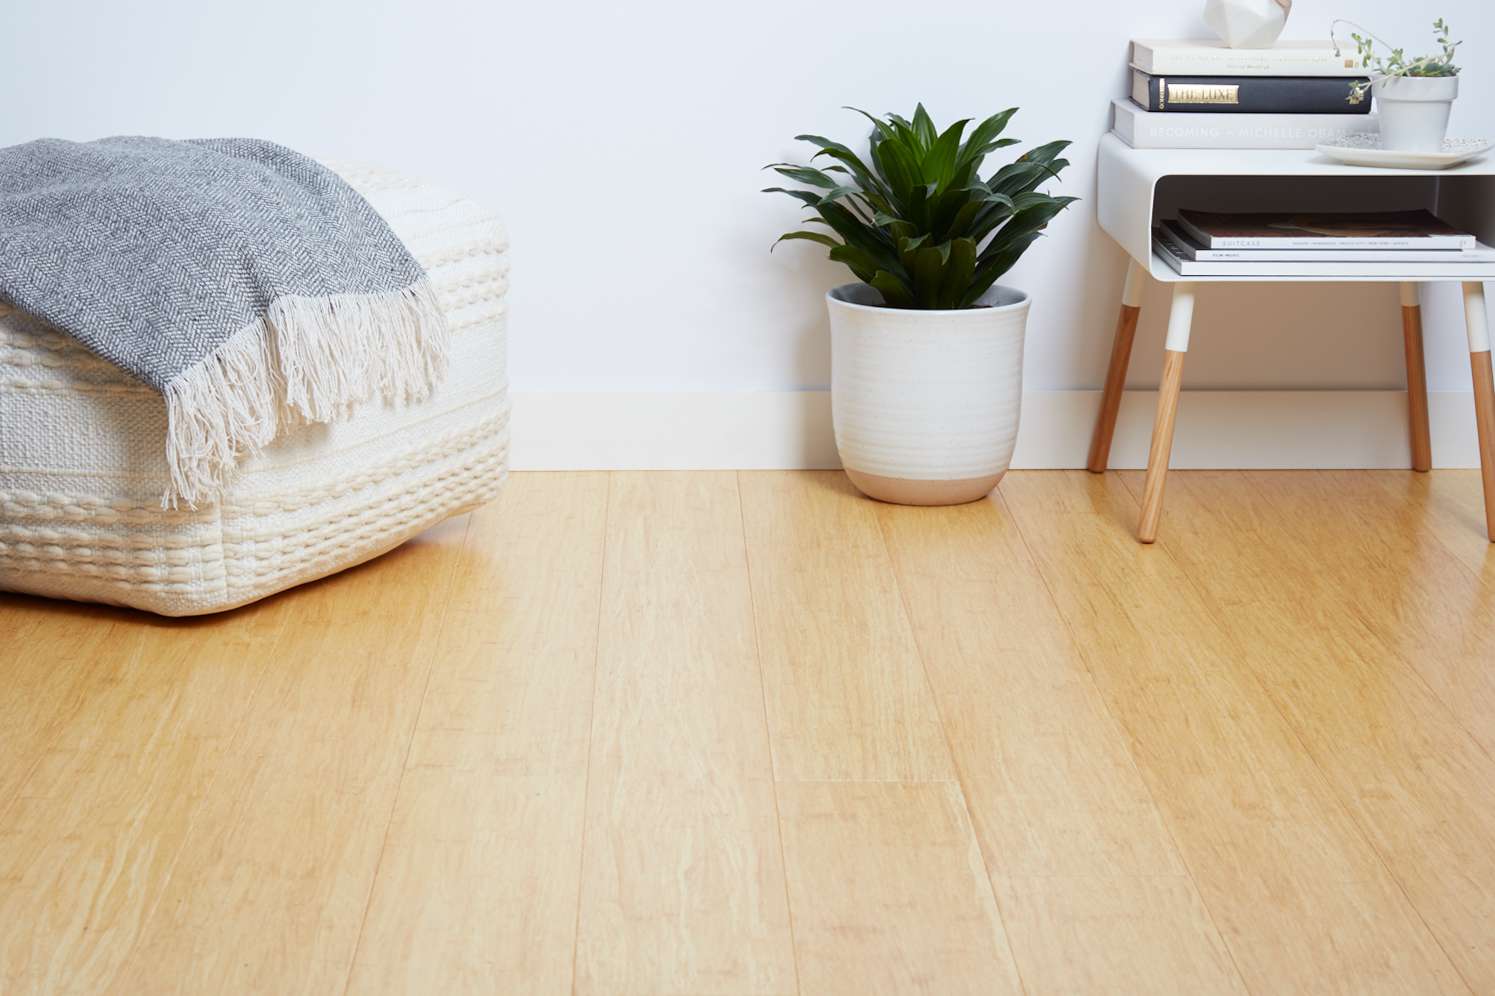 How to Choose the Right Flooring for Your Home